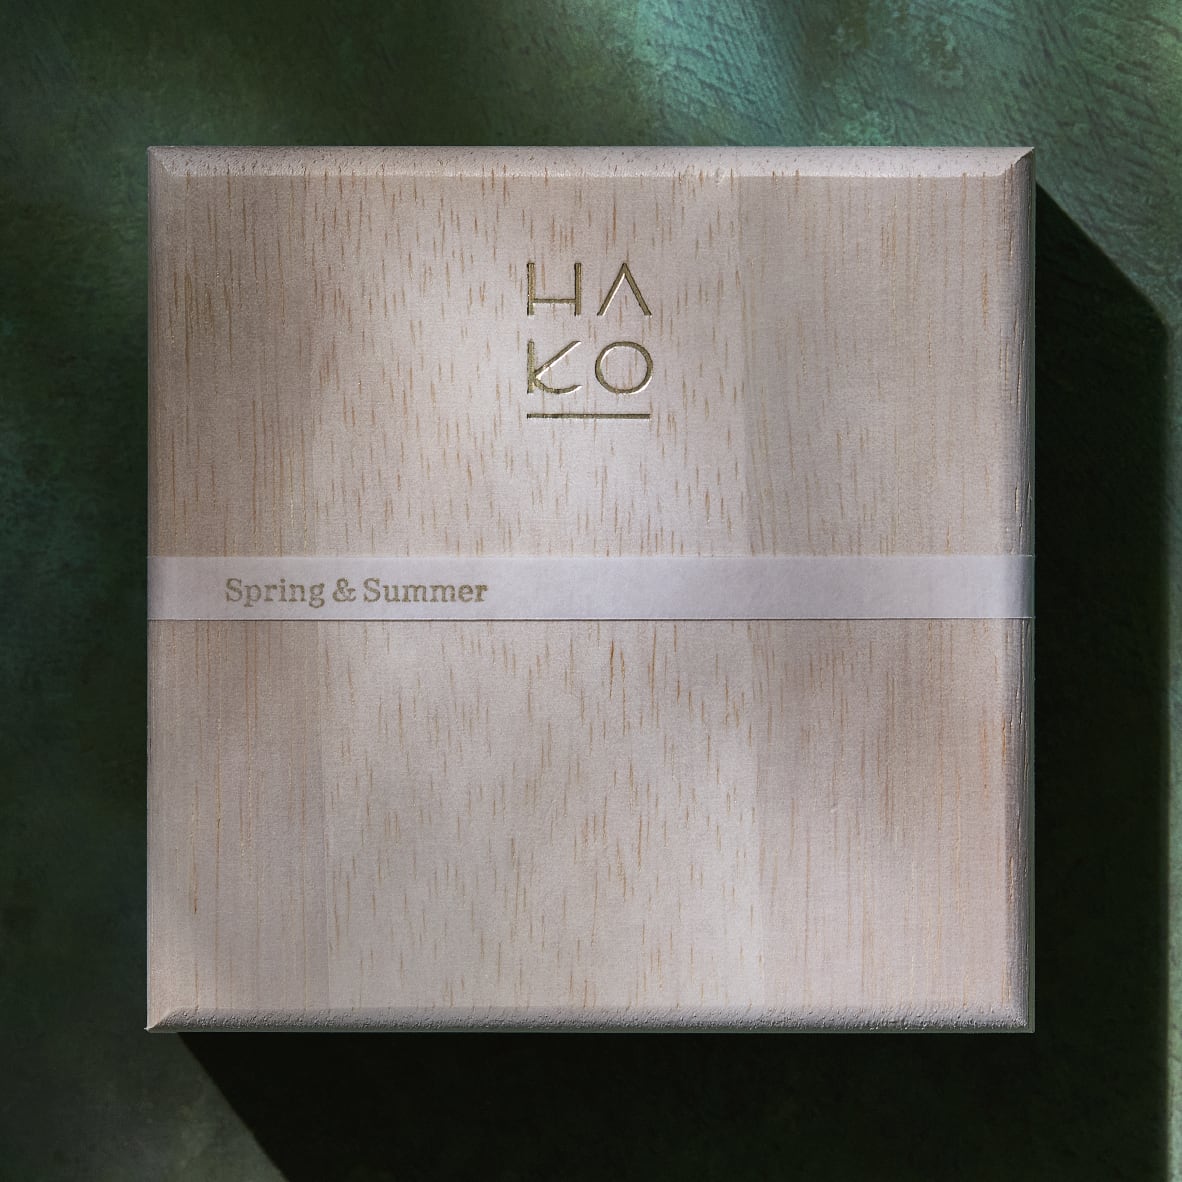 HA KO Spring & Summer Collection Box set of eight with a collaborative plate hand-made by a Japanese potter